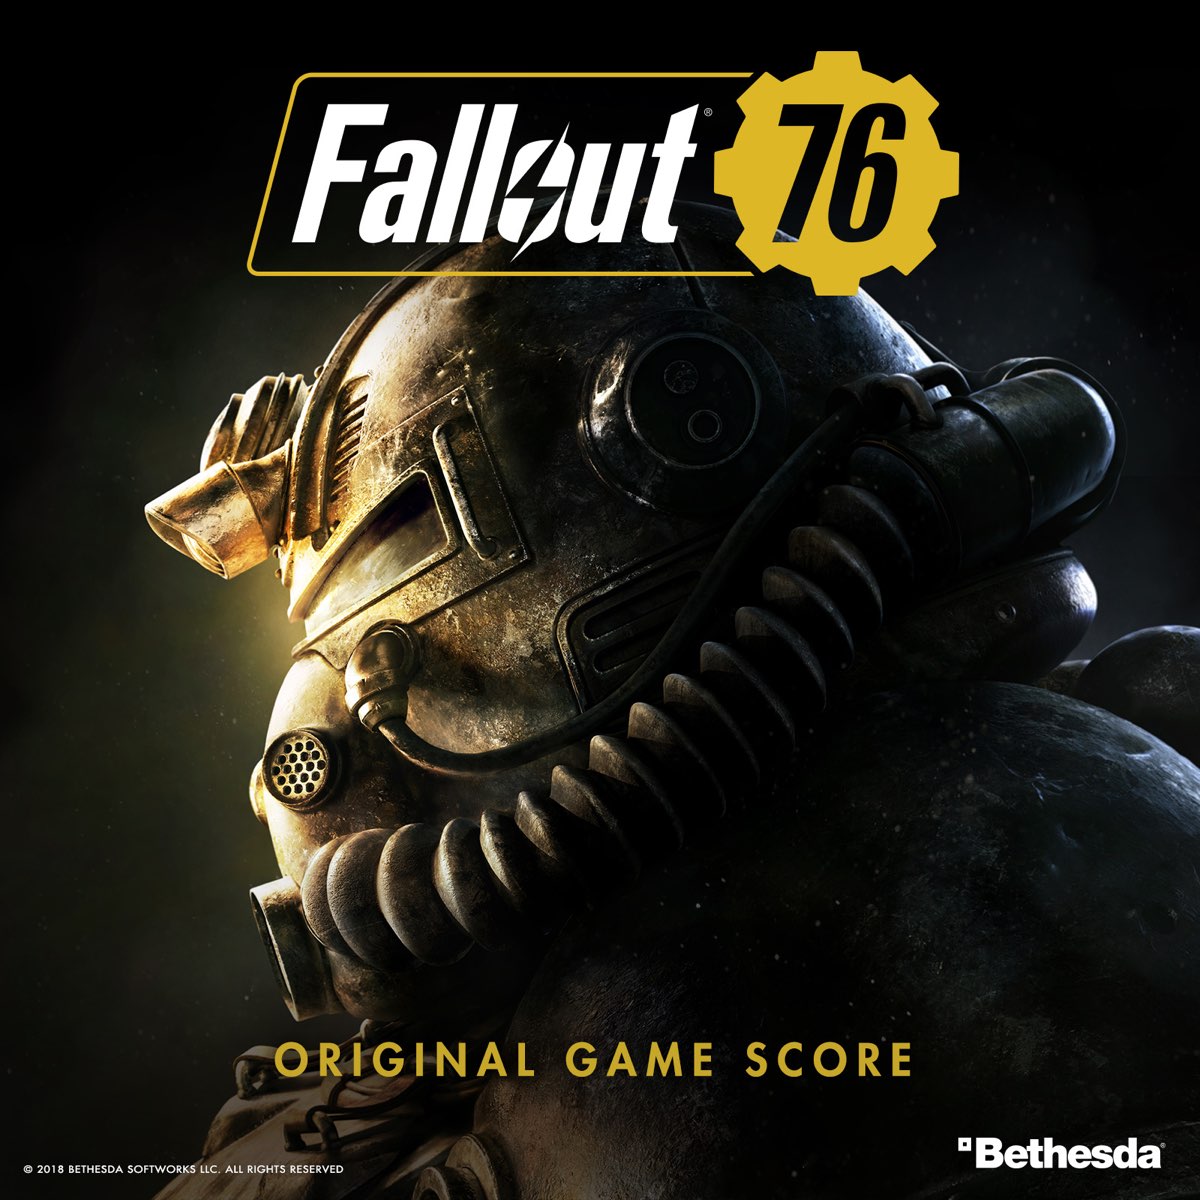 Fallout 76 | Official Game Score